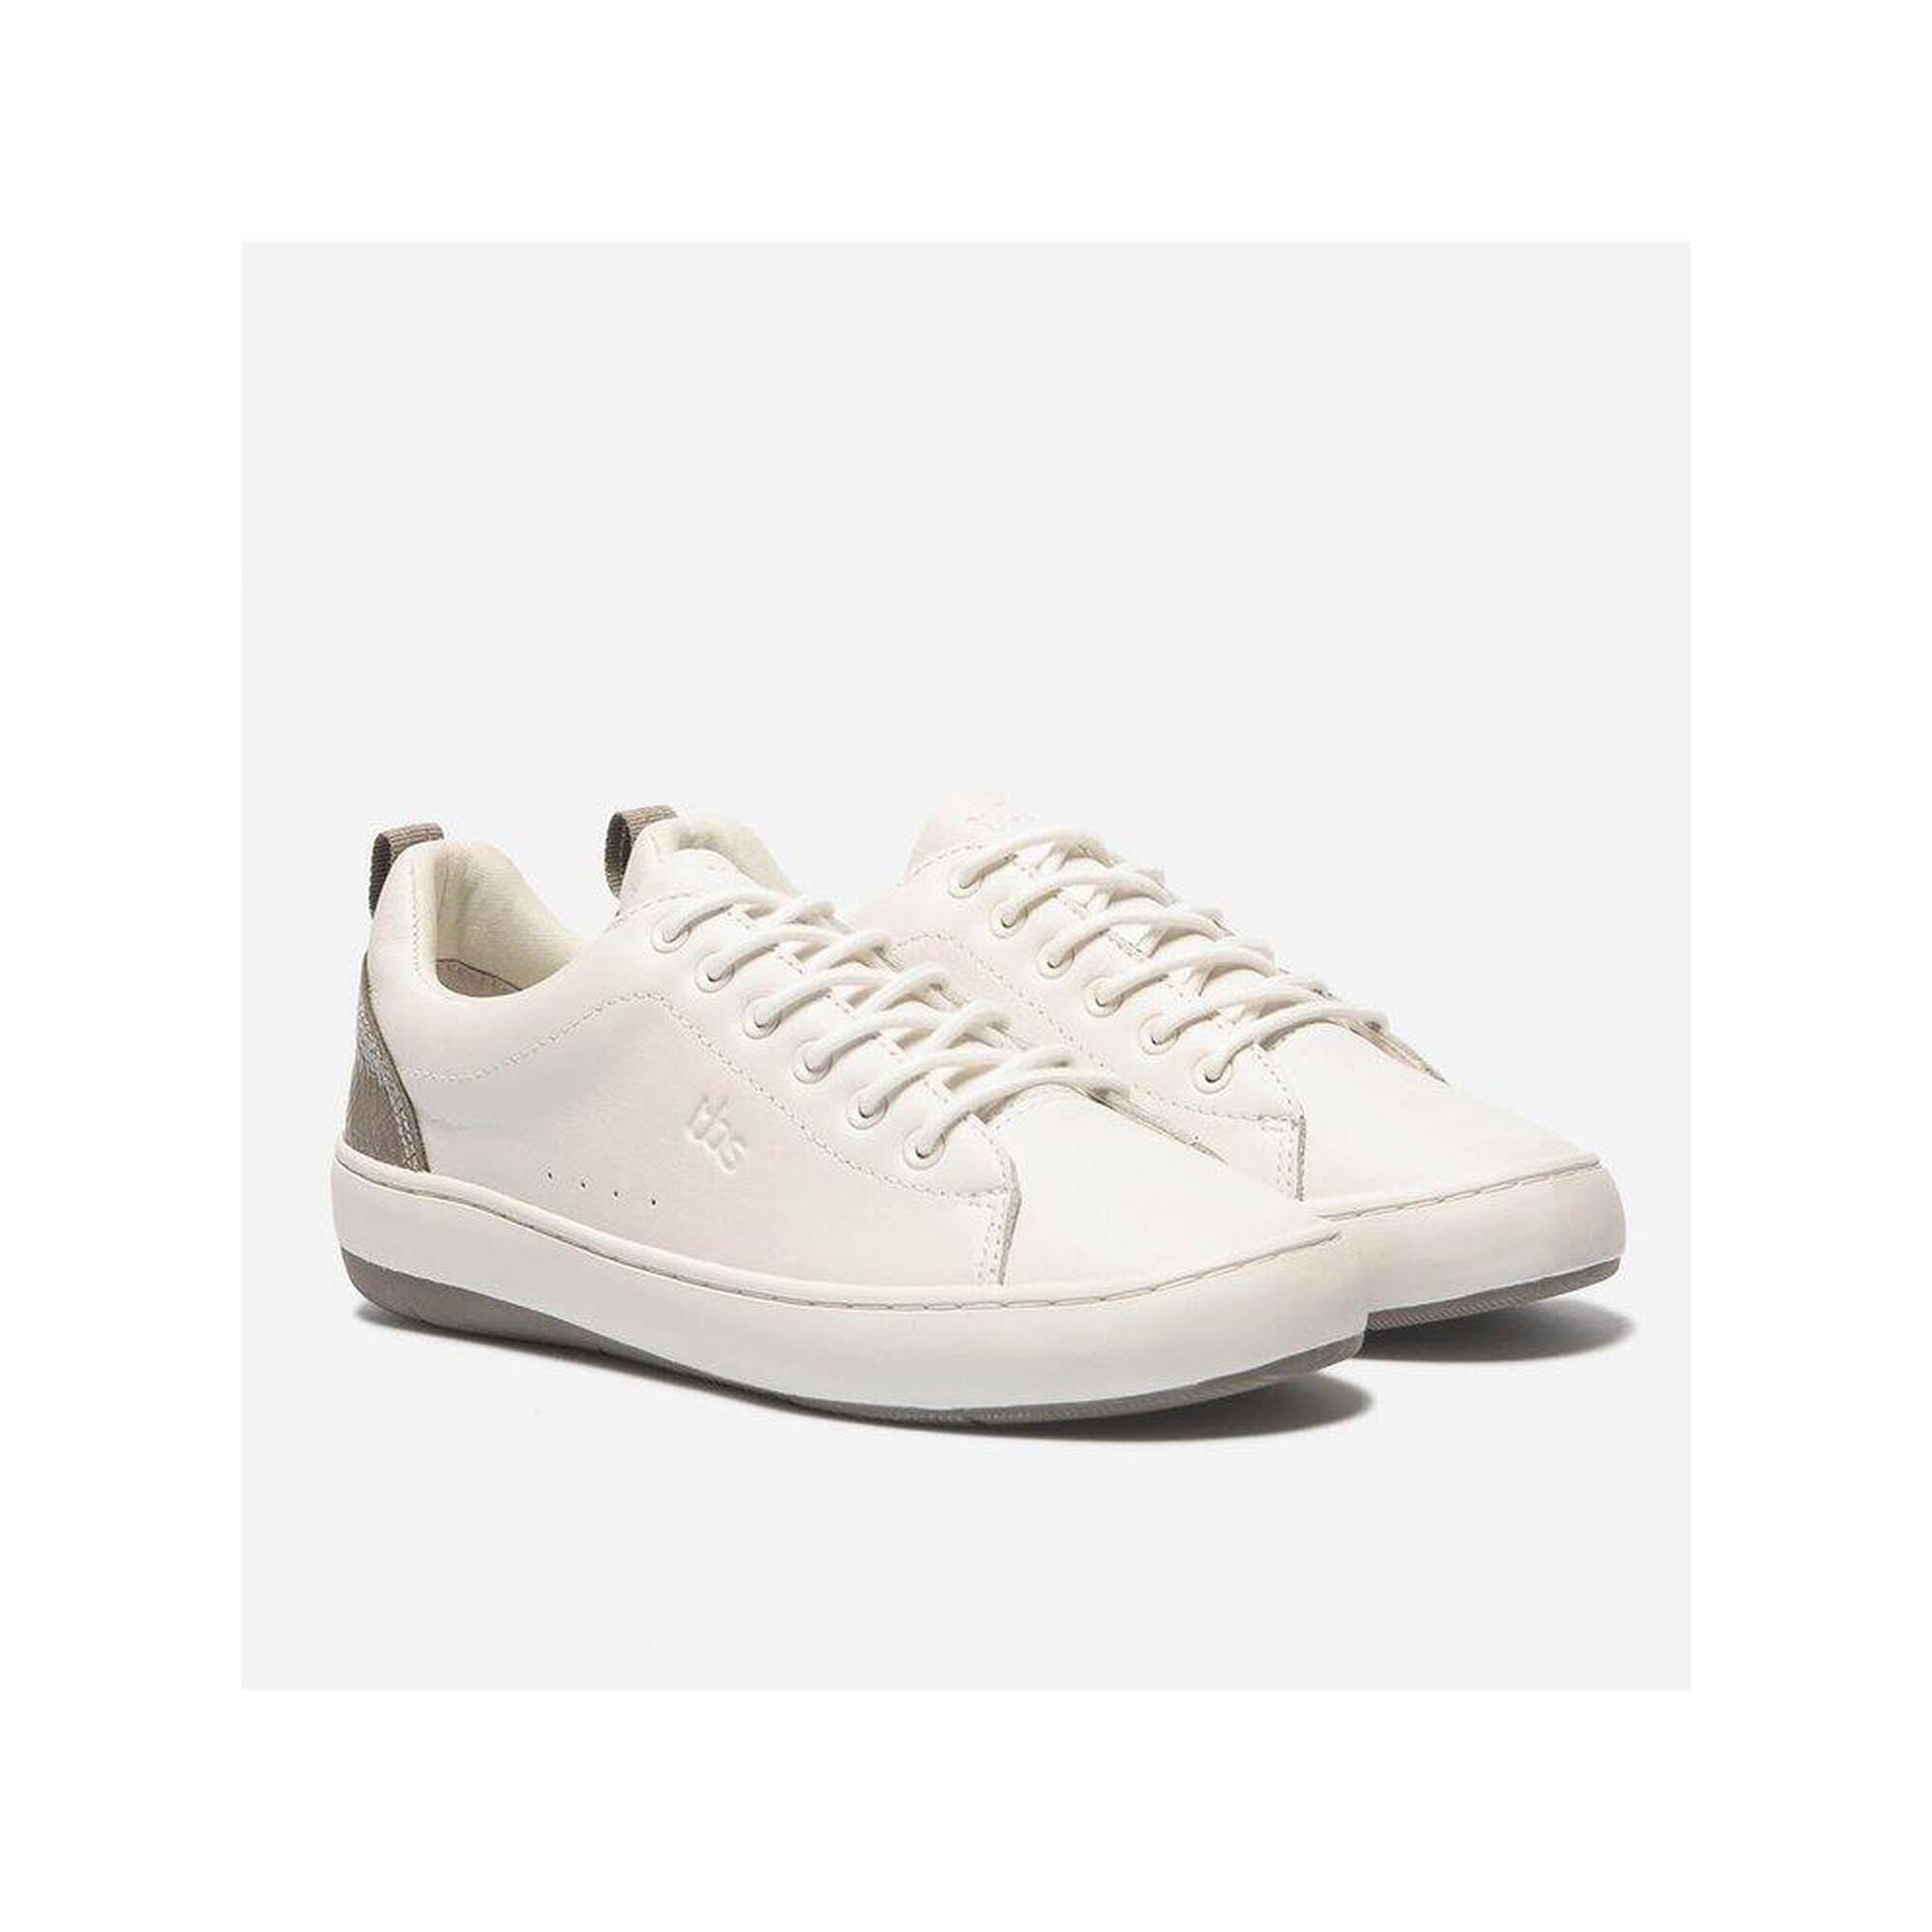 Baskets cuir Femme - THIMORA Off-white + Taupe